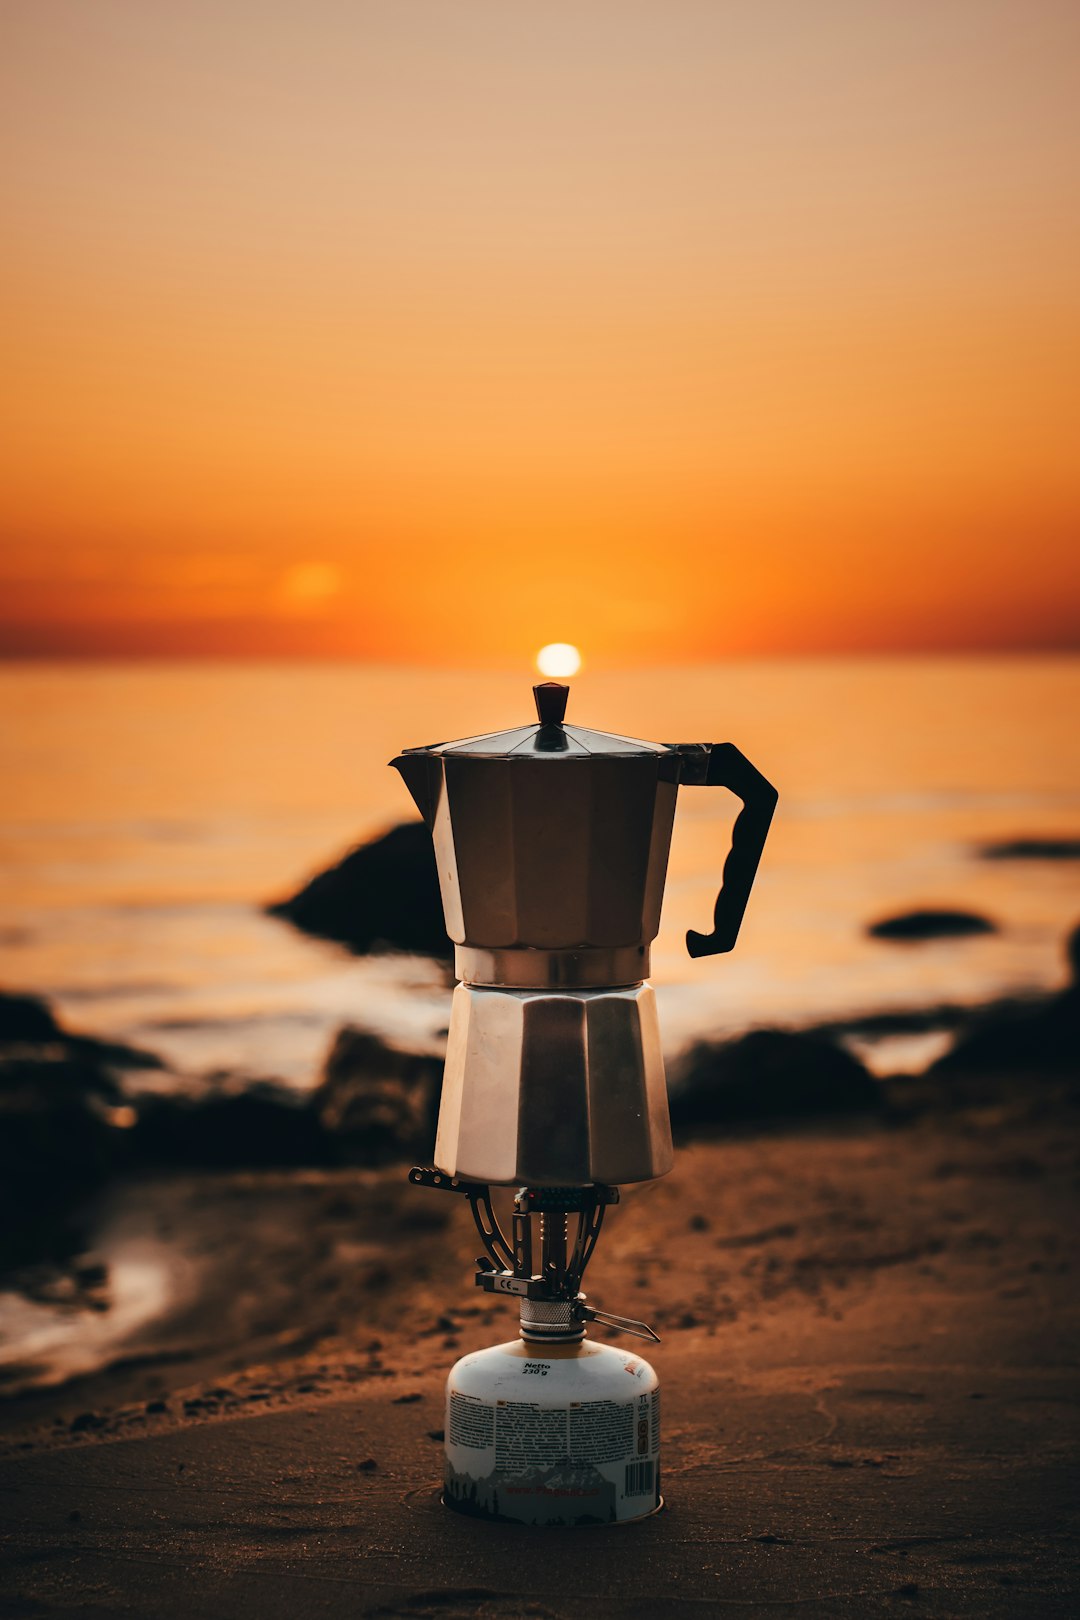 gray and black coffee maker on brown sand during sunset